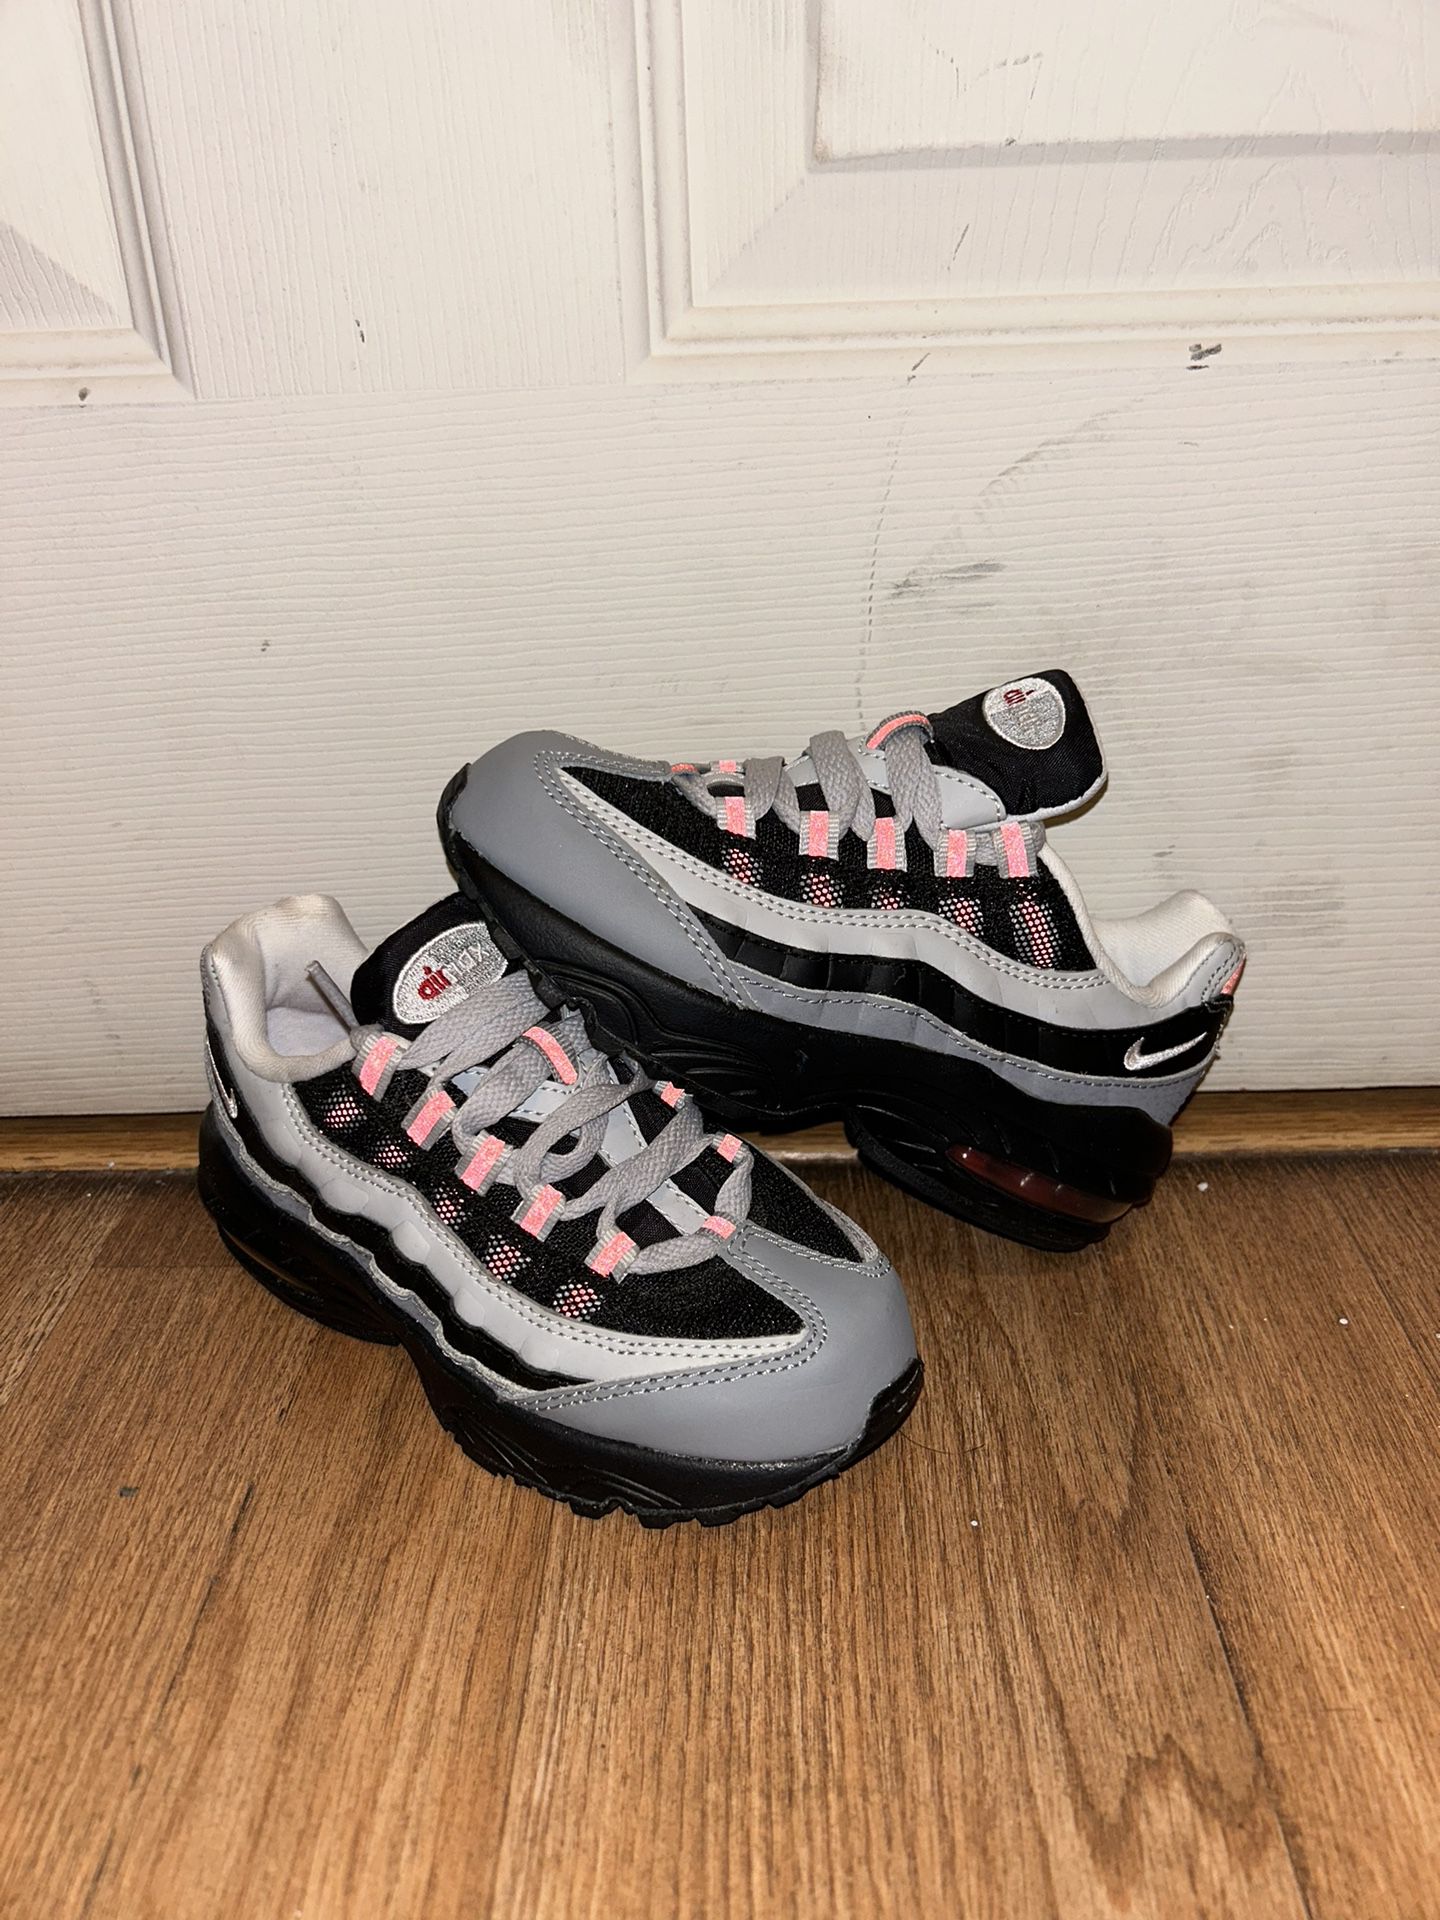 Brand New No Tags Nike Air Max 95 Particle Grey / Infrared Red Shoes Size  11c for Sale in Los Angeles, CA - OfferUp